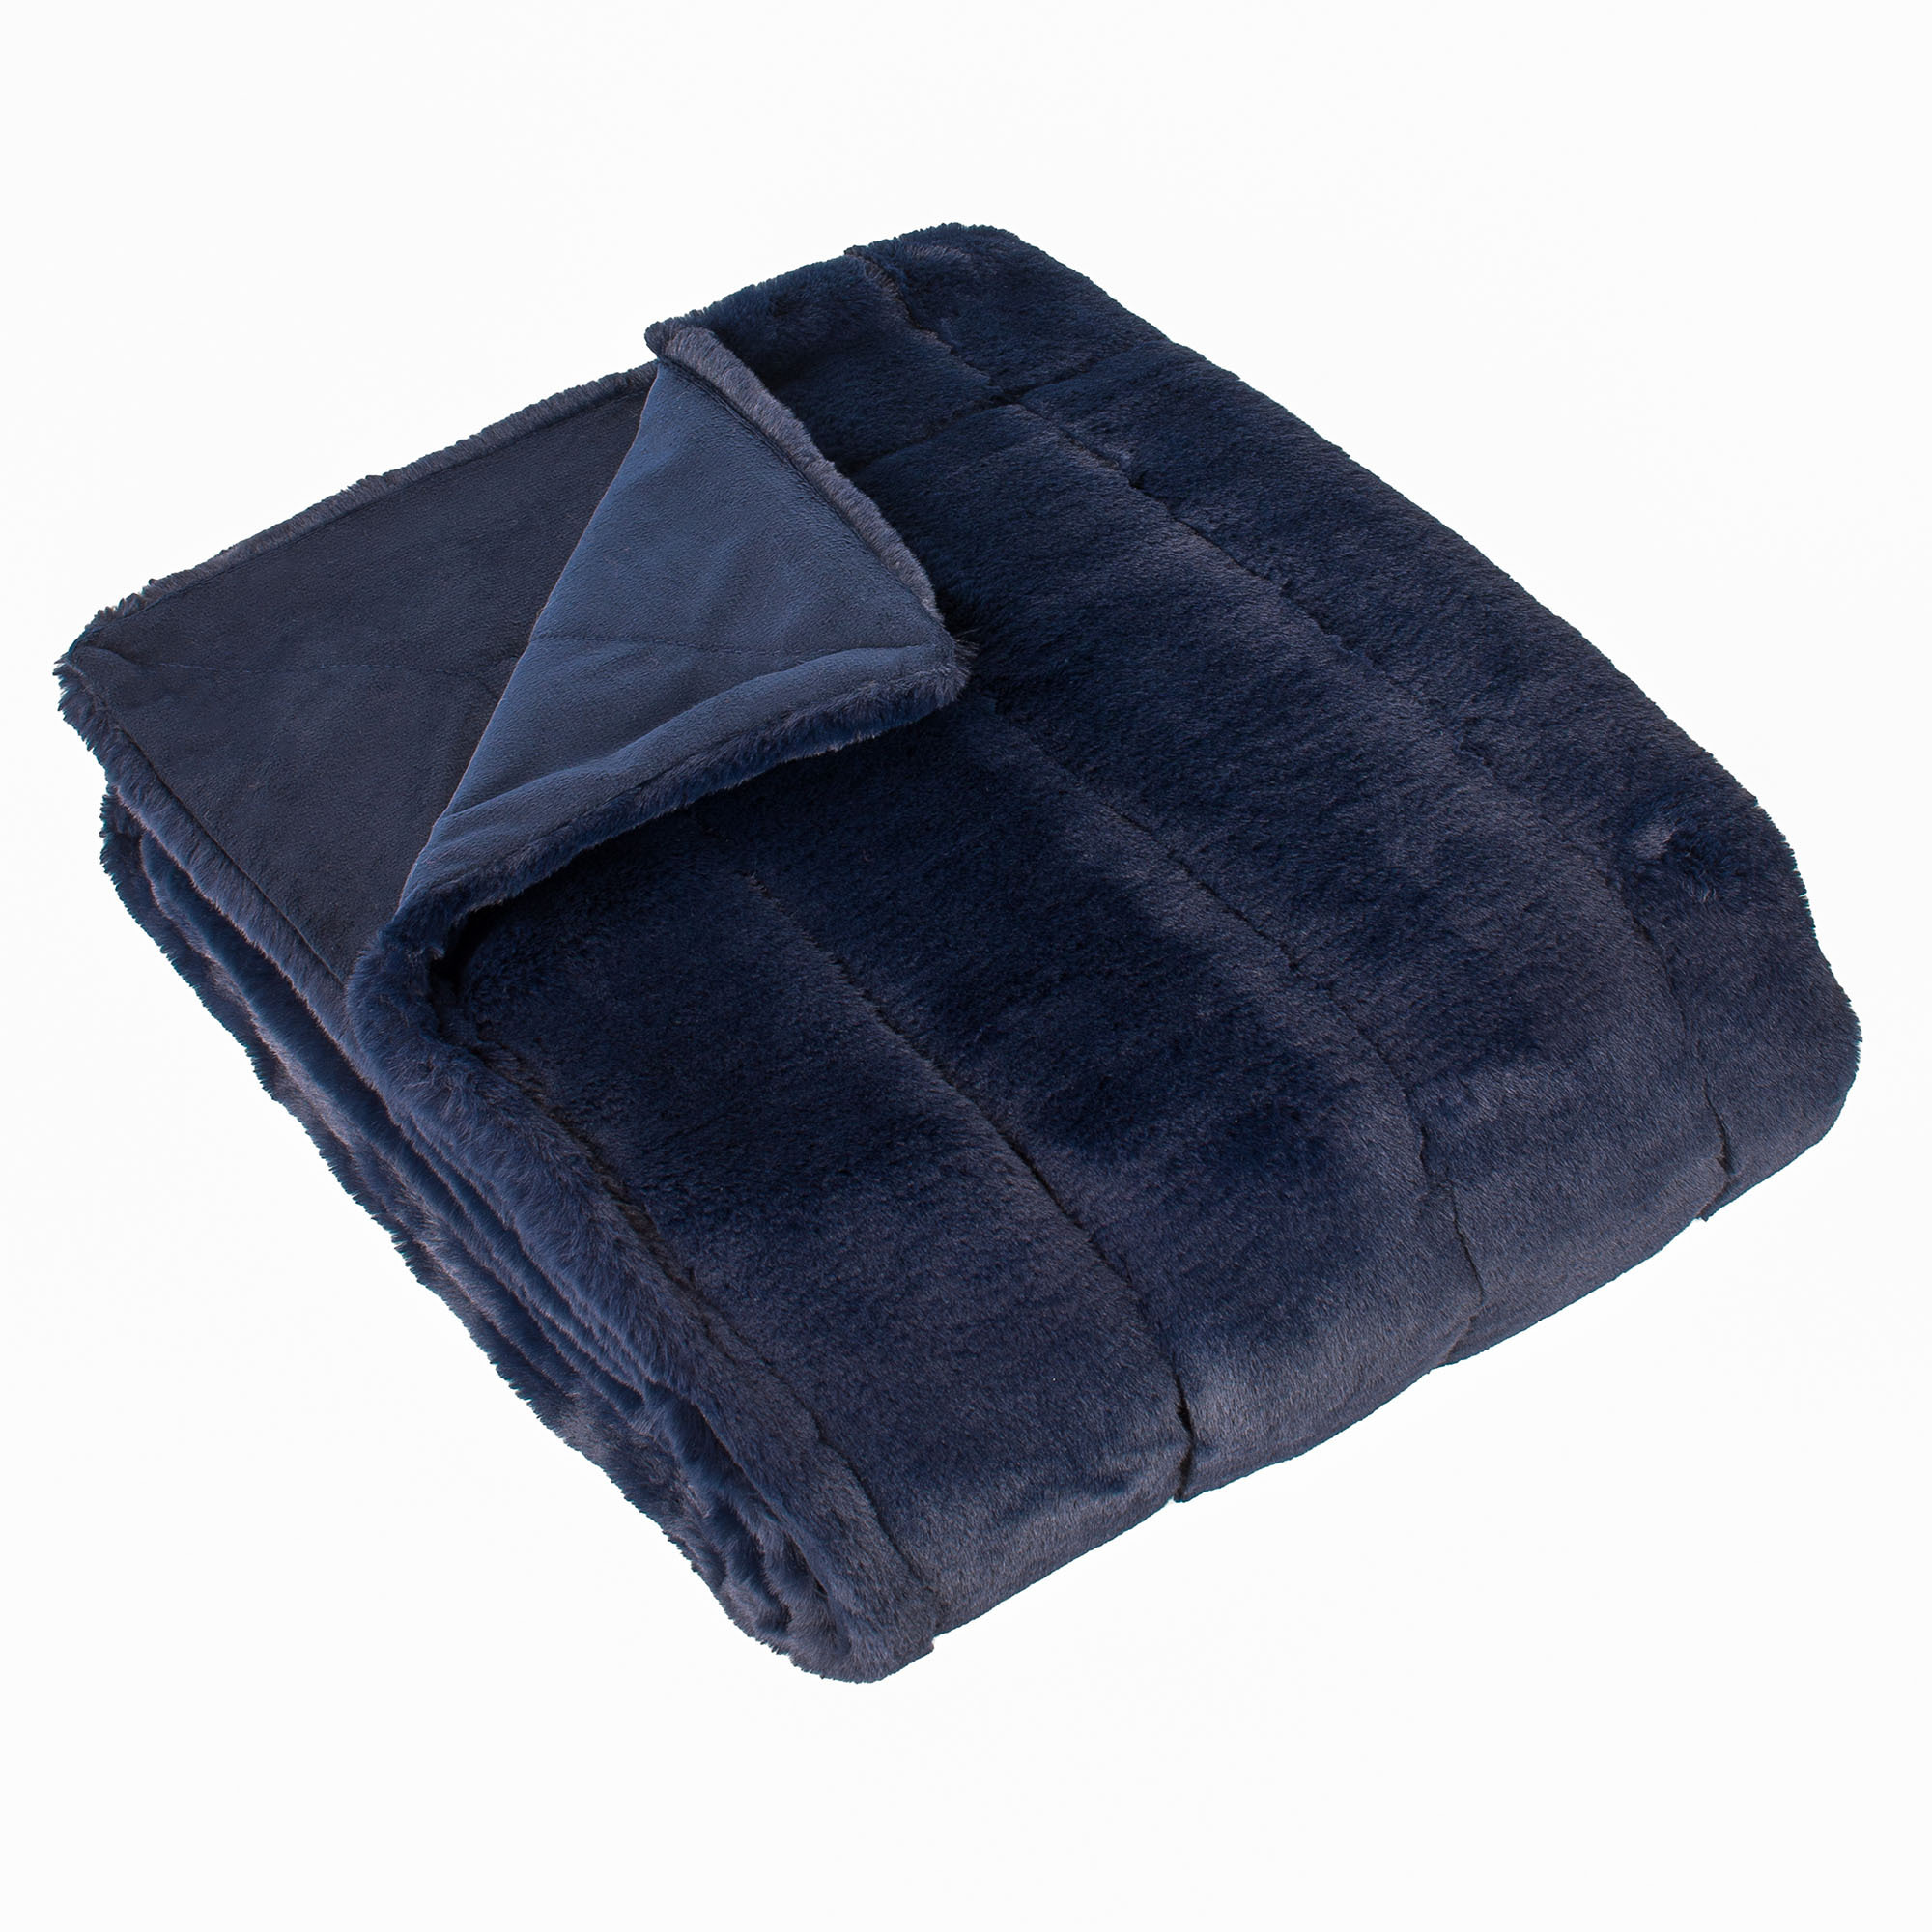 Navy Faux Fur Throw Blanket, Blue Polyester - Barker & Stonehouse - image 1